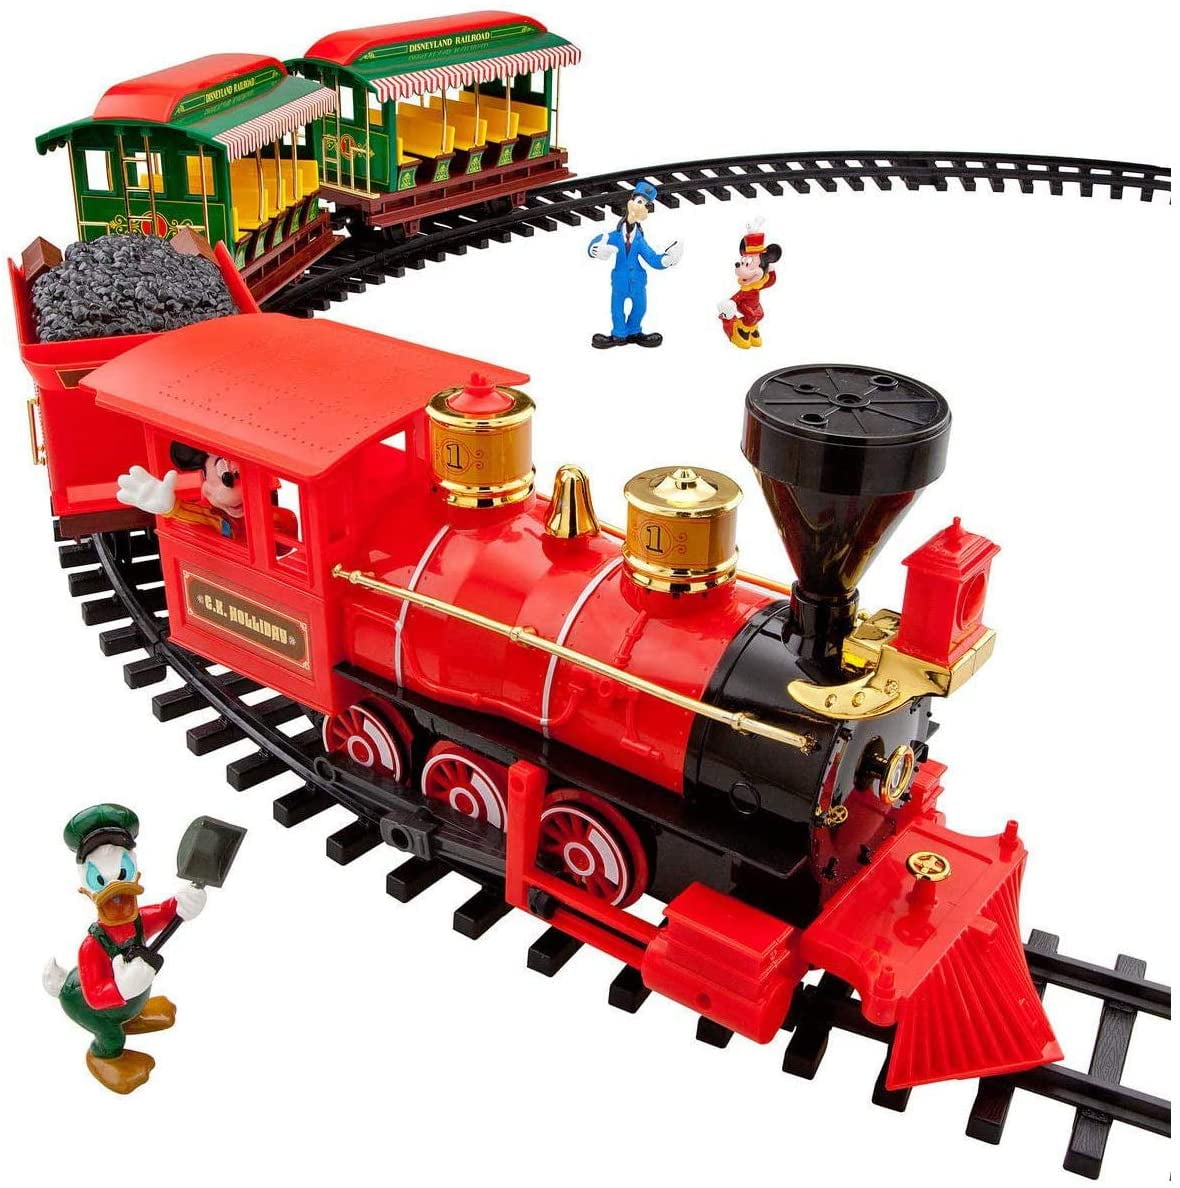 Ride the rails with this new Disneyland Lego train set